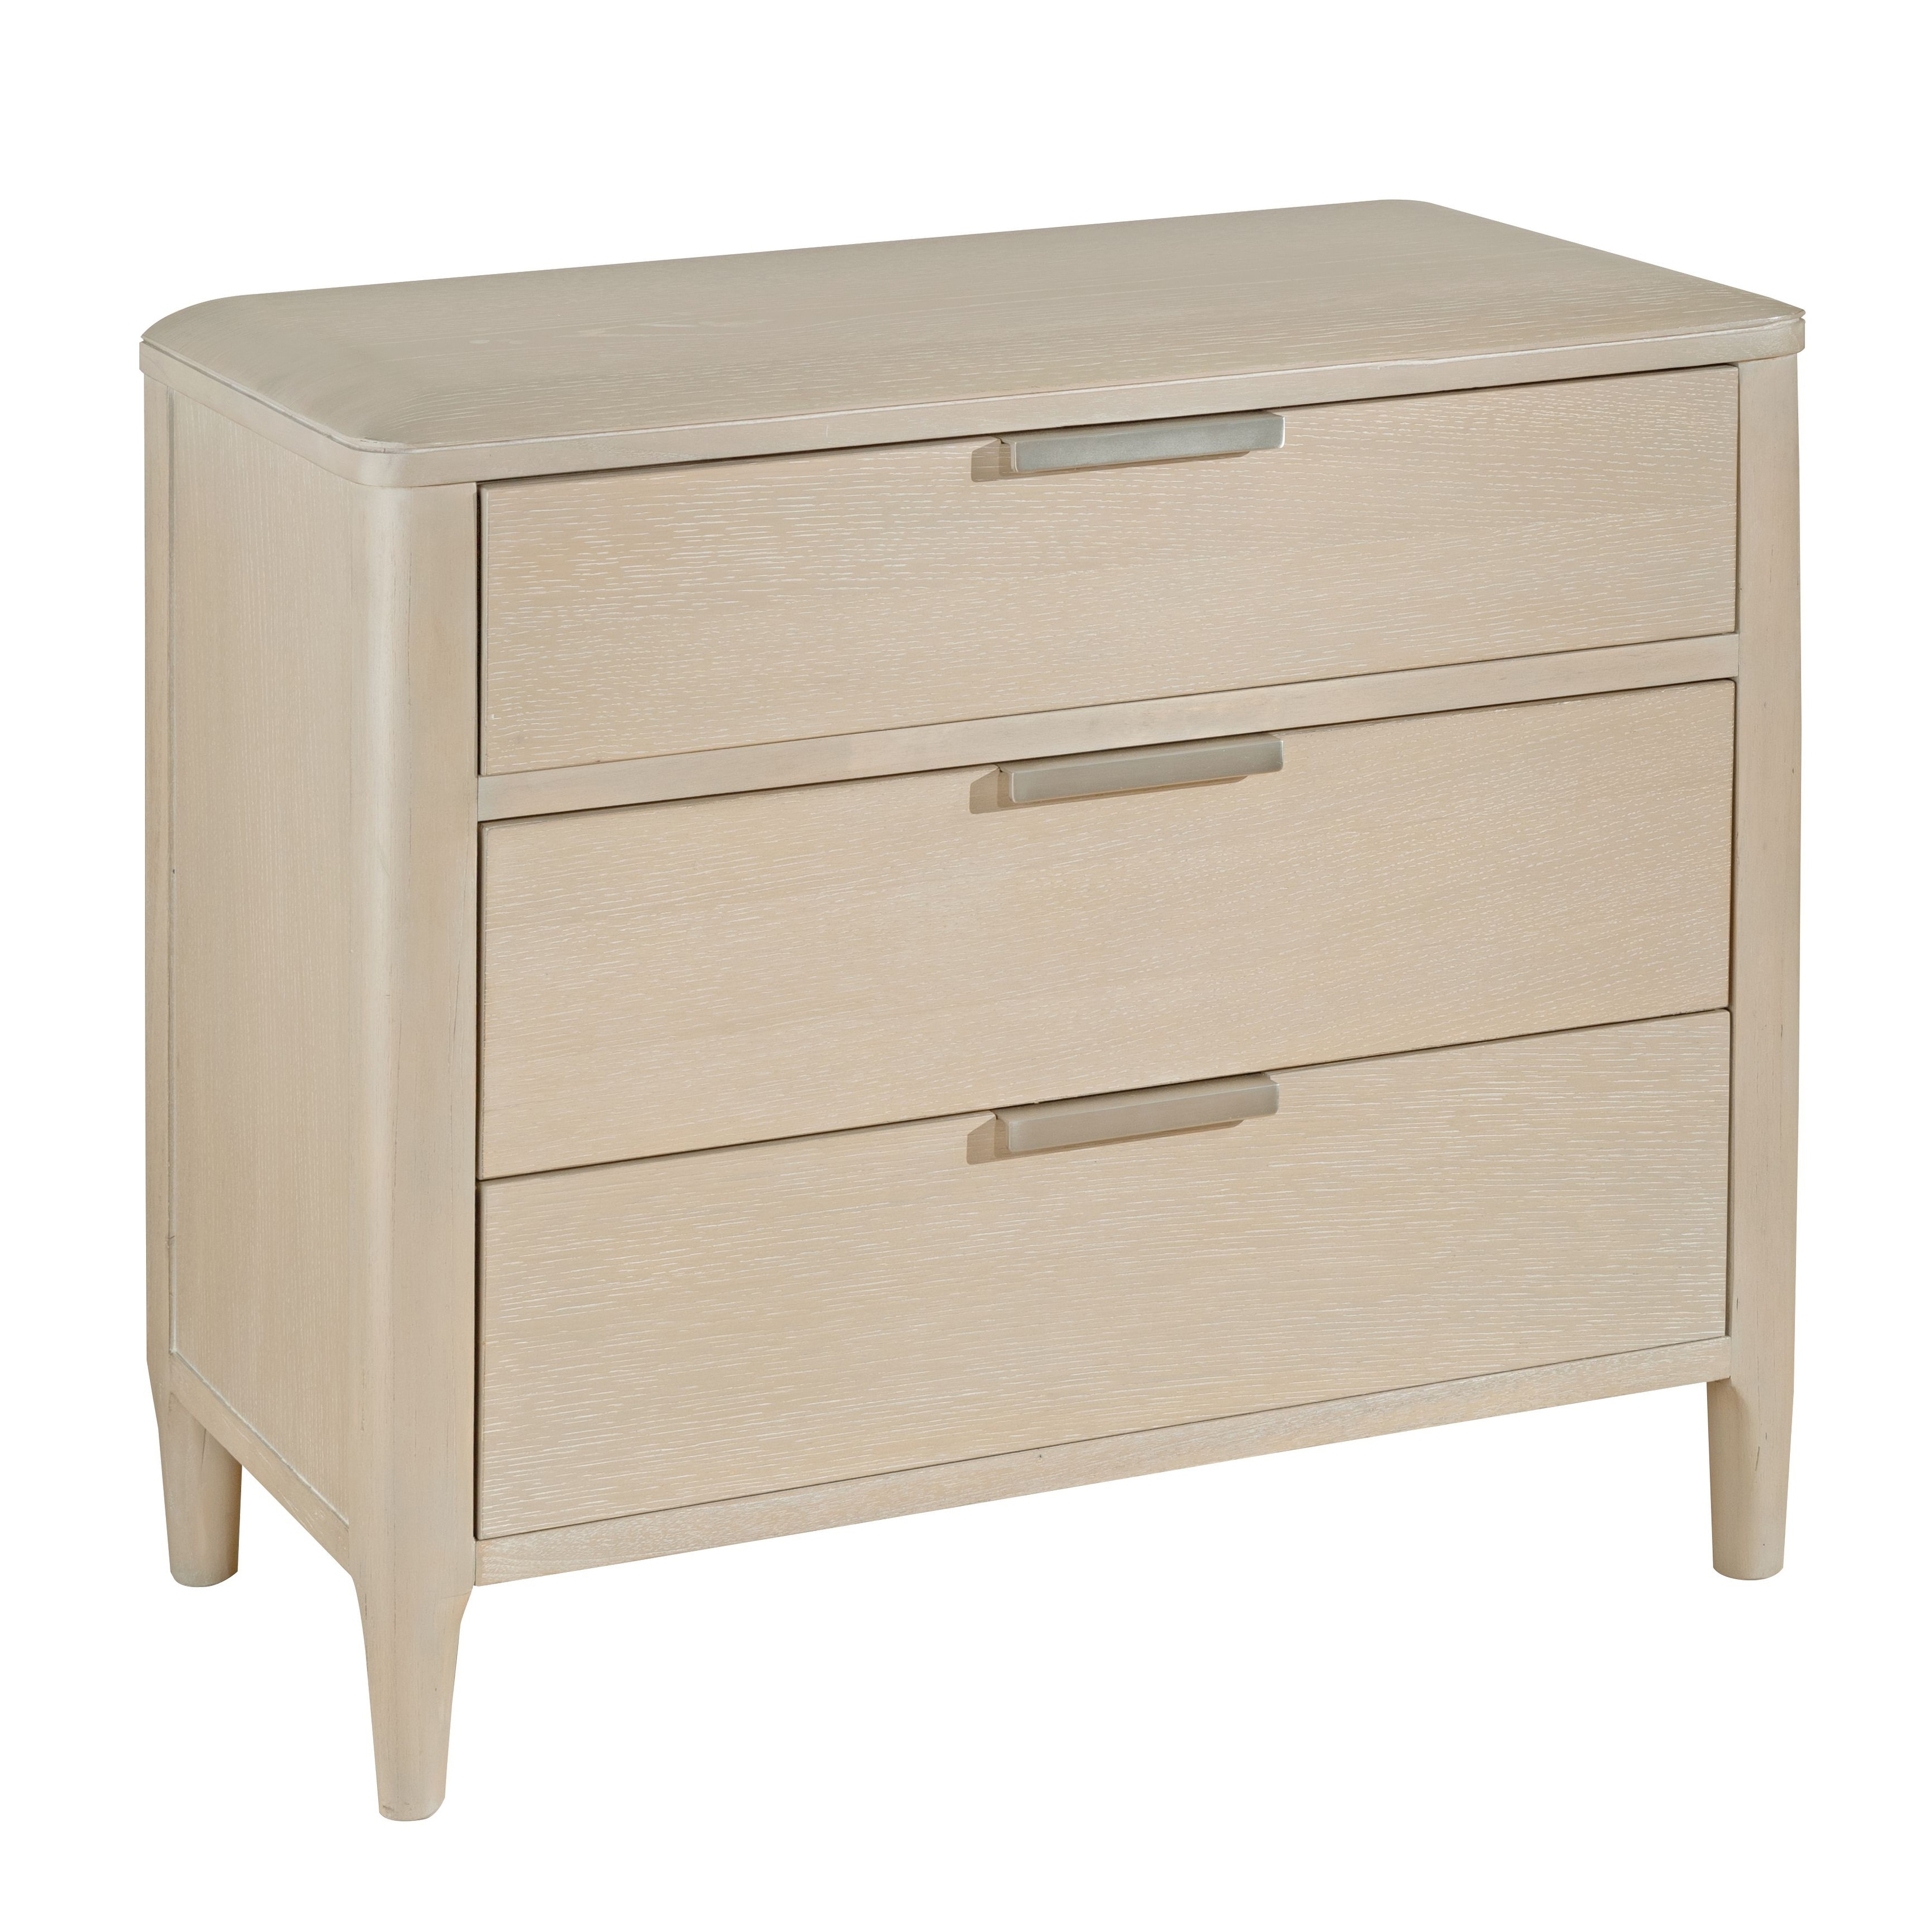 https://ak1.ostkcdn.com/images/products/is/images/direct/435daaf2f341f646d833a7a7329a70505177da0e/Pearl-3-drawer-Nightstand-with-USB-port-by-Palmetto-Home.jpg